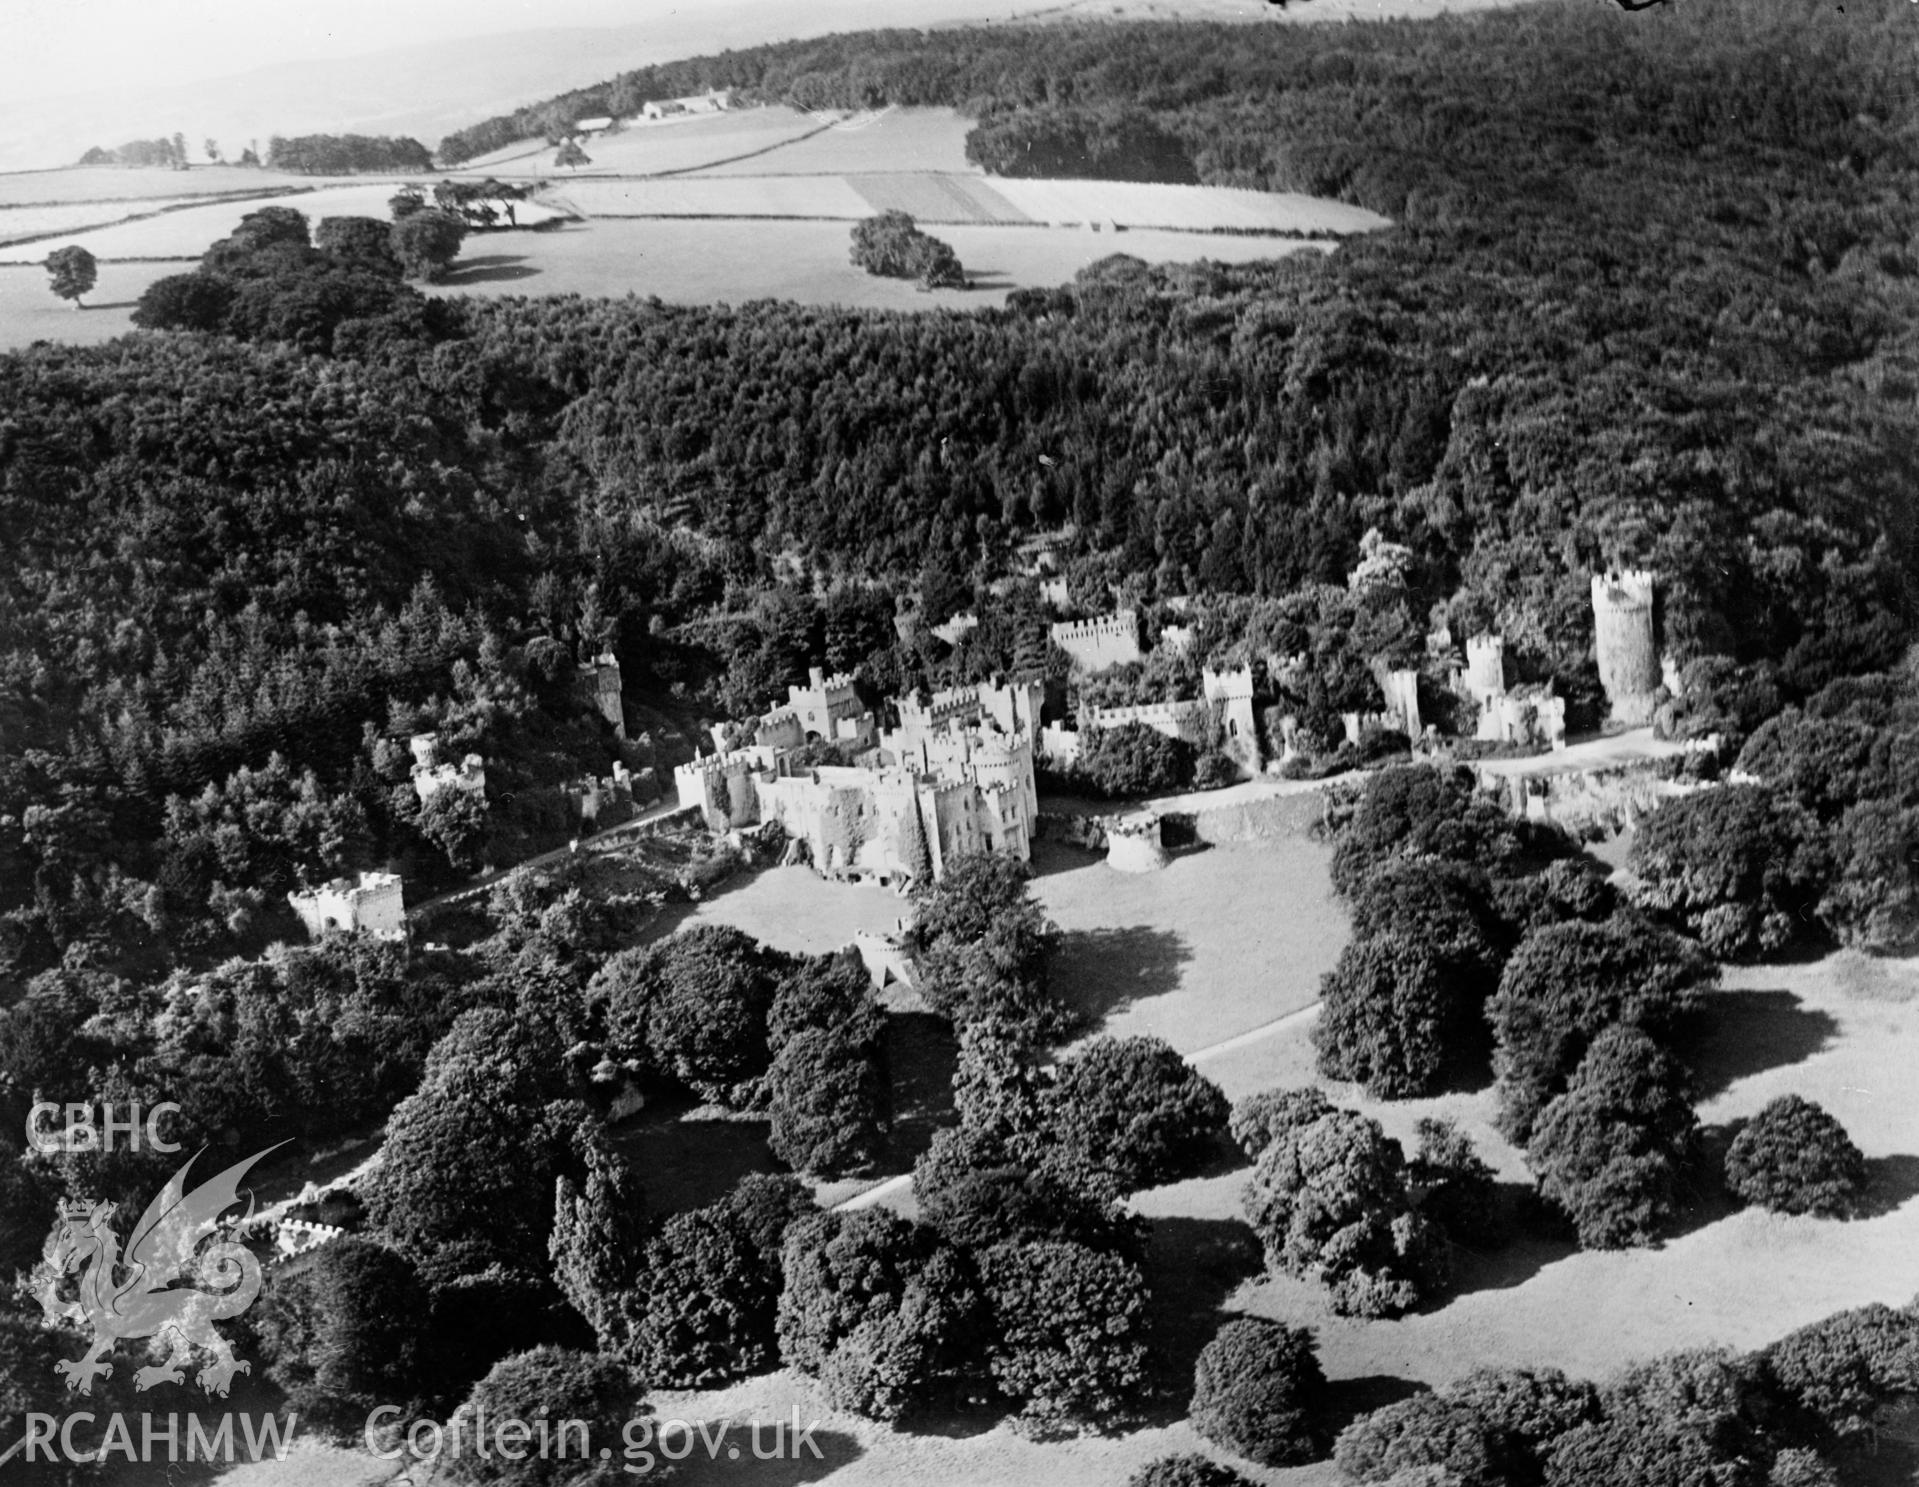 View of Gwrych Castle, Abergele. Oblique aerial photograph, 5?x4? BW glass plate.